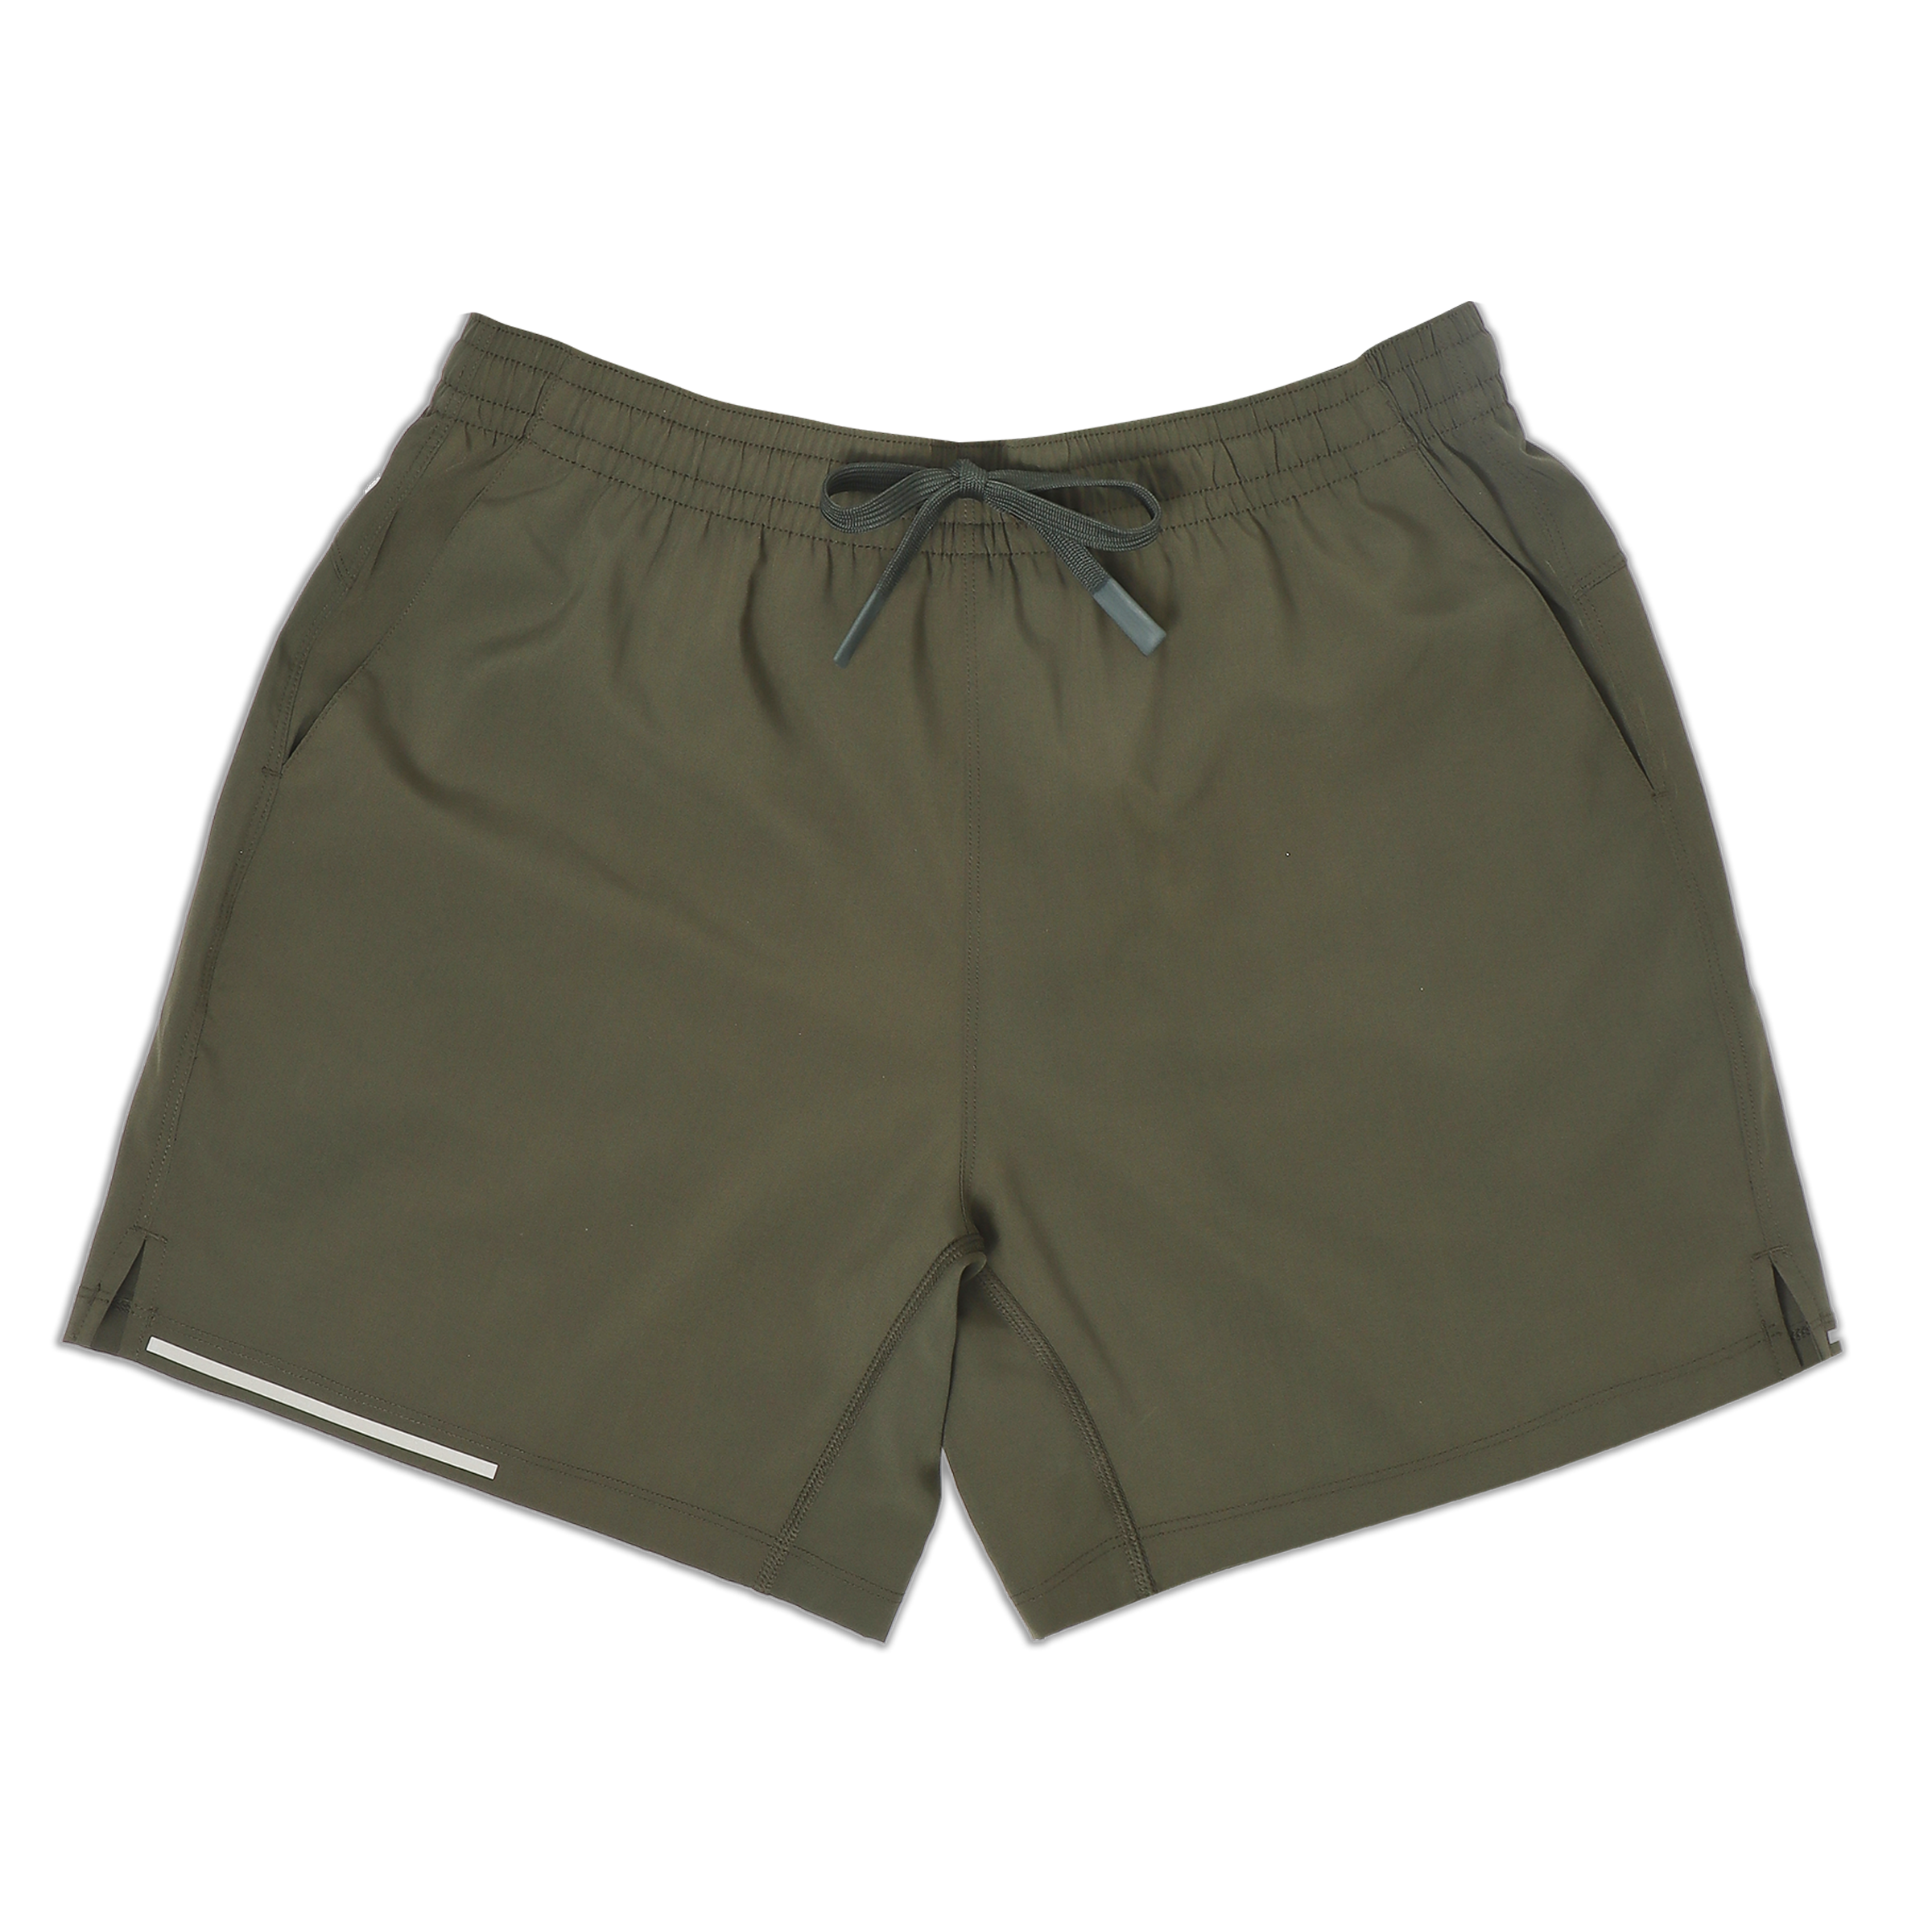 Run Short v2 7" Military Green front with elastic waistband, dyed-to-match drawstring with rubberized tips, two front pockets, split hem, and reflective line on bottom right hem